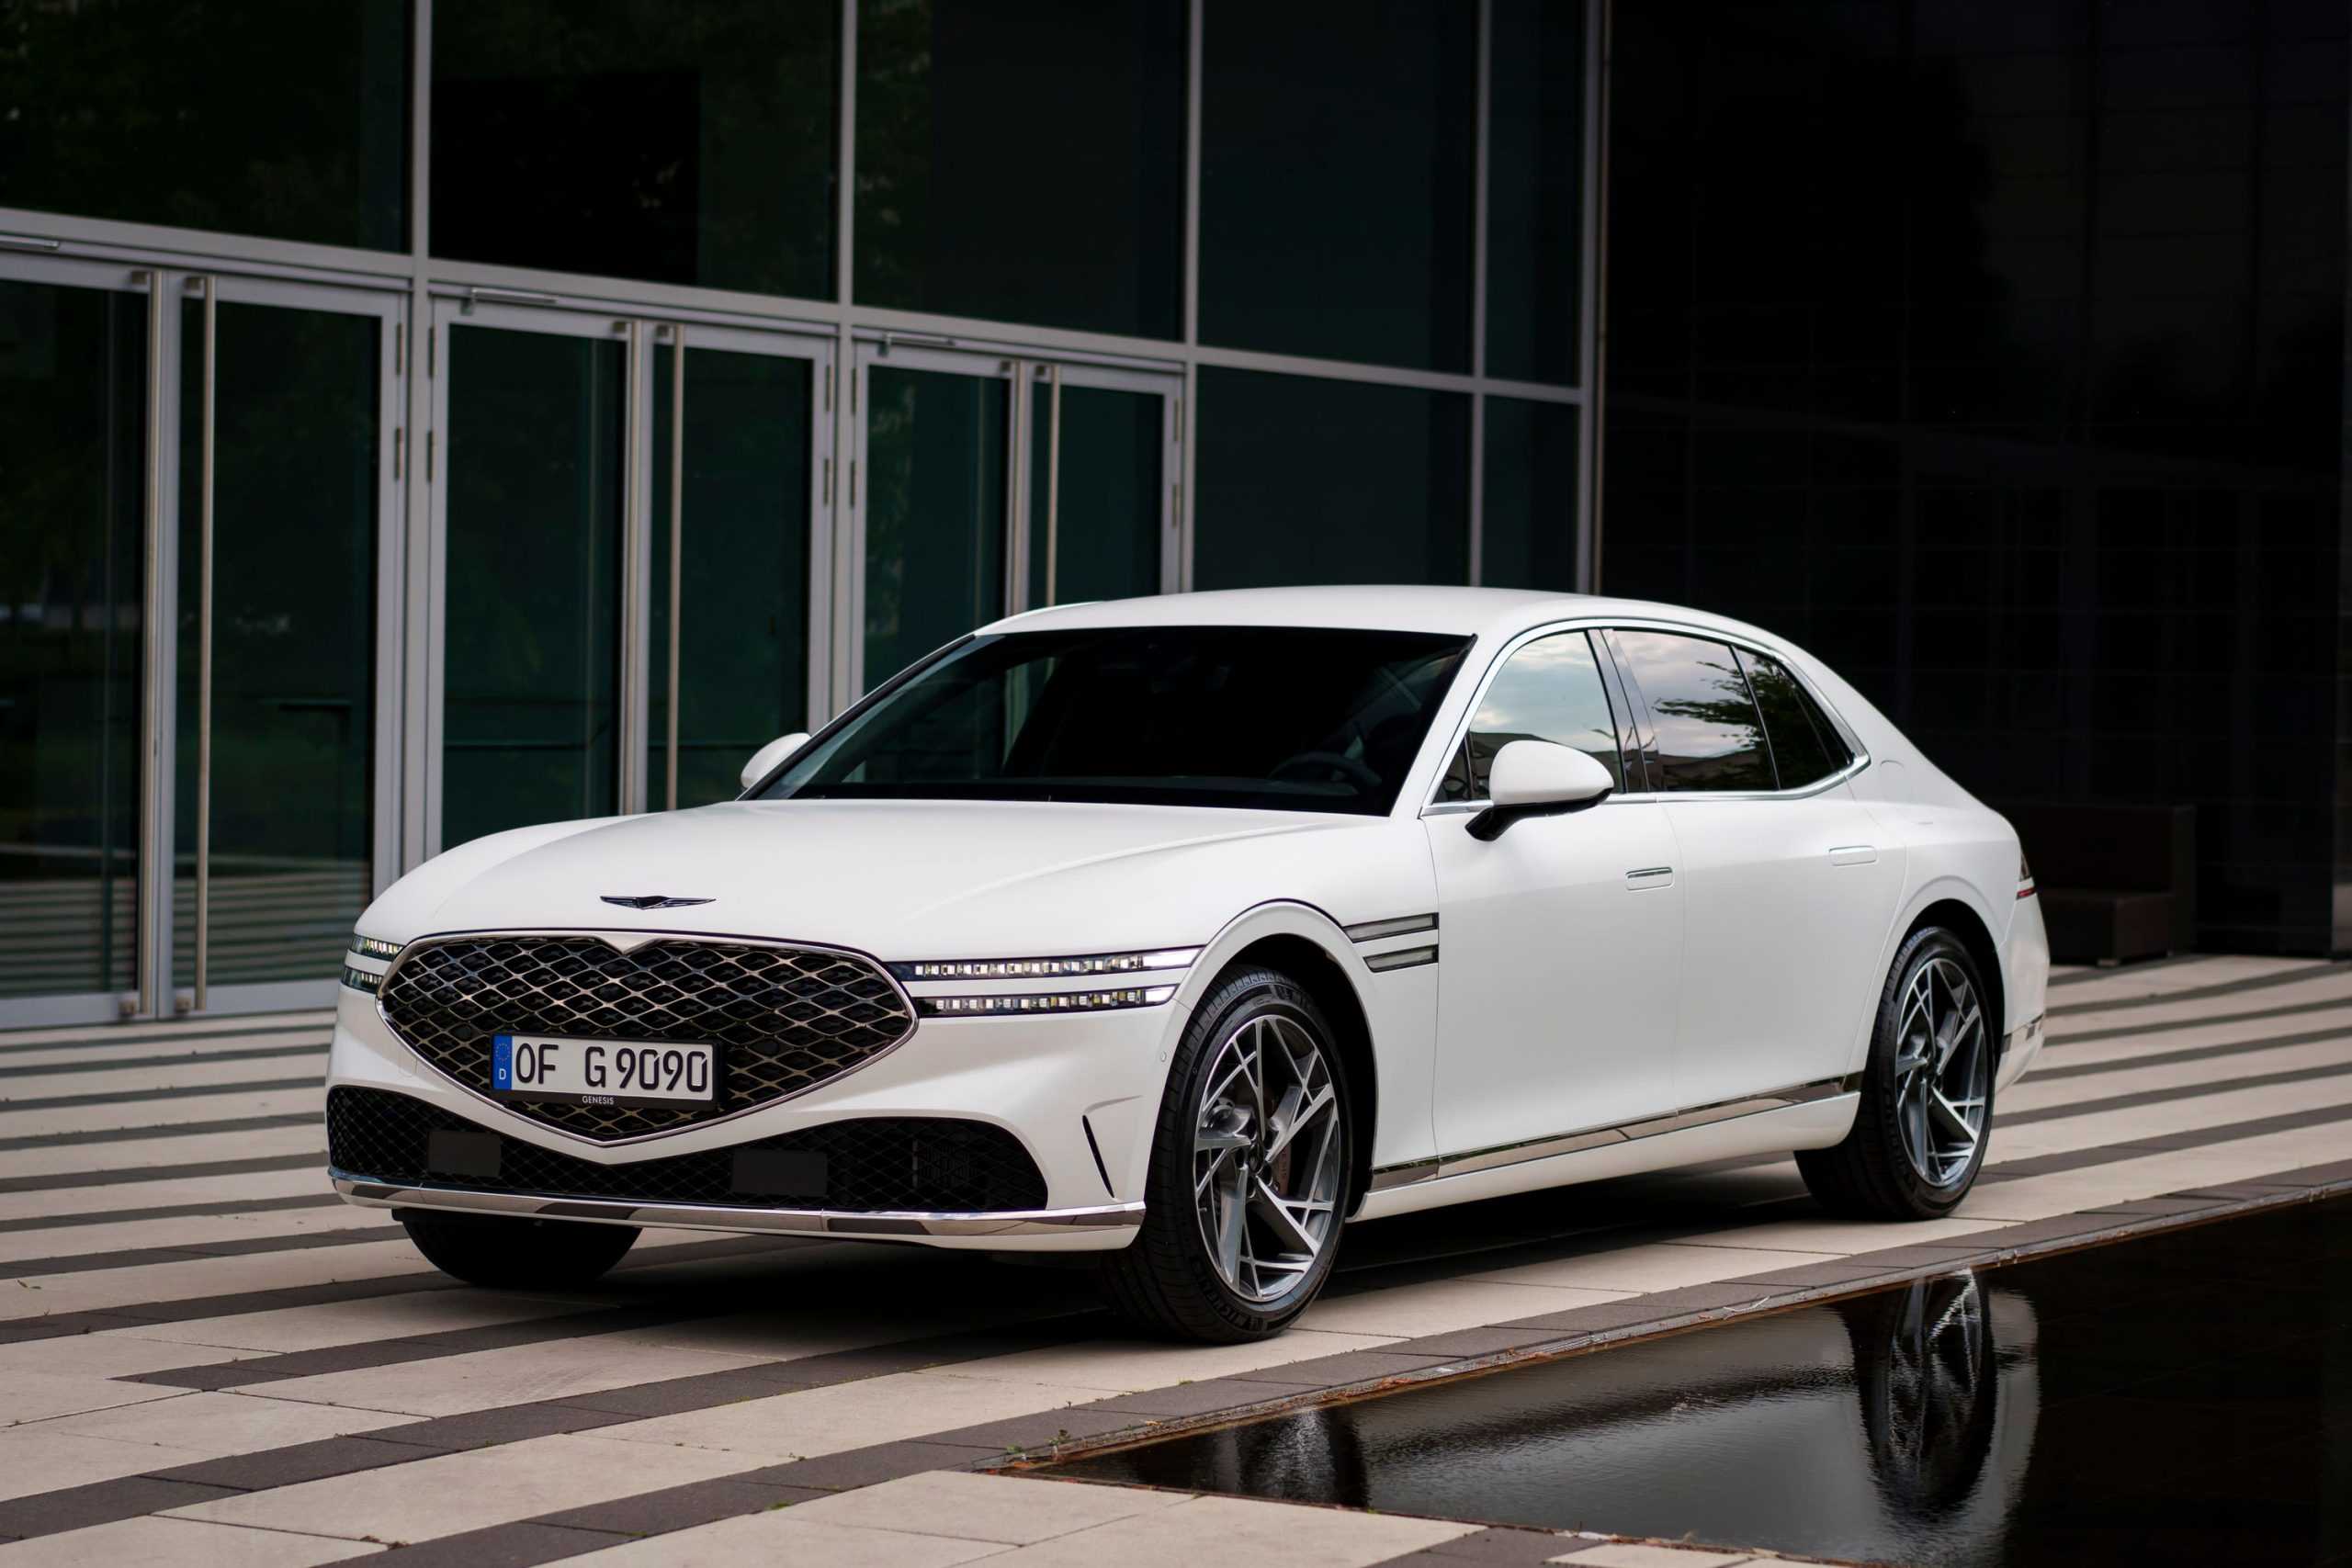 2024 genesis gv80 facelifts the suv and brings the coupe to life - tflcar